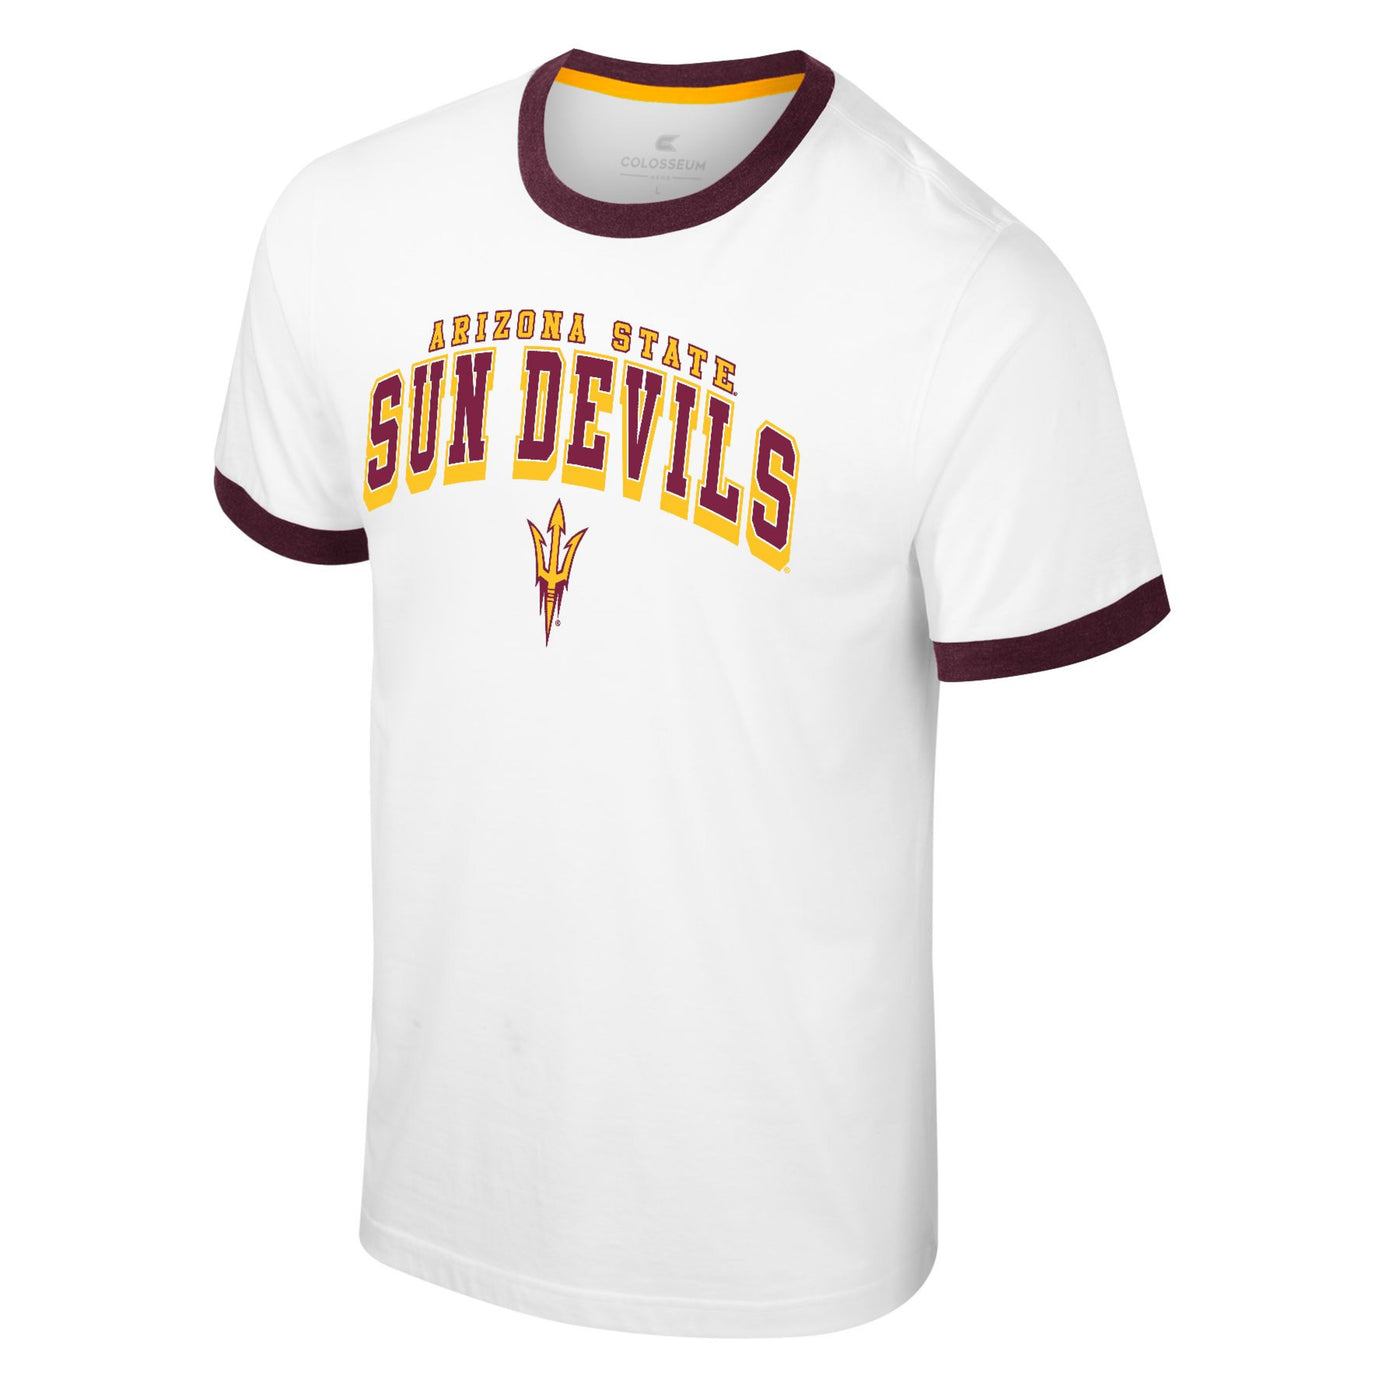 ASU white t-shirt with a maroon trim. The text 